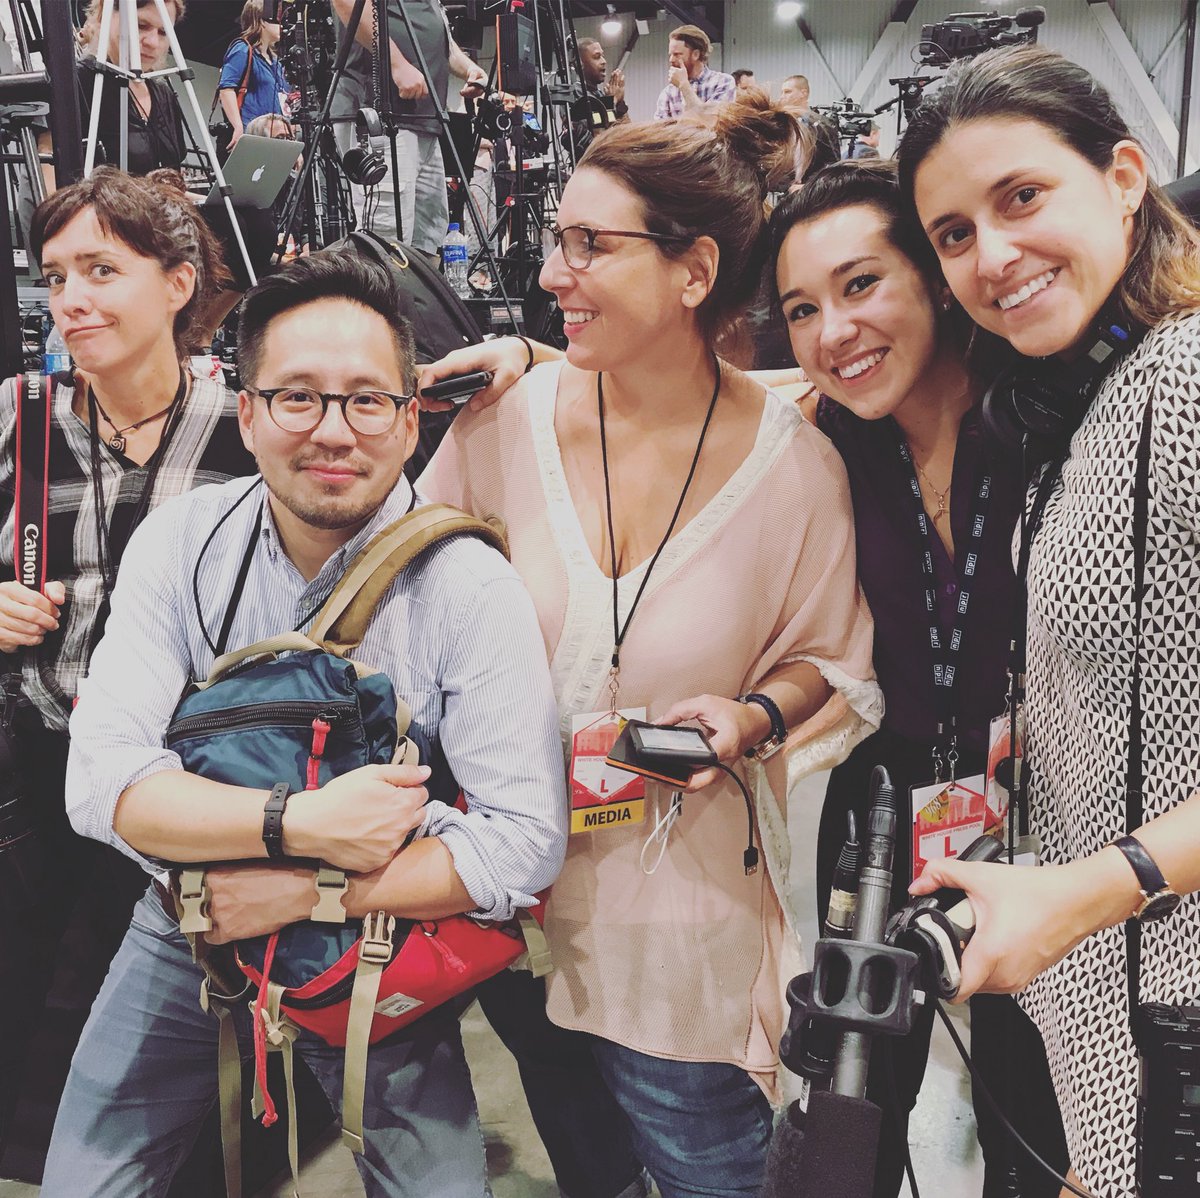 Your @NPRWeekend team this week covering Nevada’s politics and more! Currently attending President Trump’s rally in Las Vegas. Tune in Sunday for some fascinating stories @lourdesgnavarro @sososophia16 @vietqle @allison_shelley